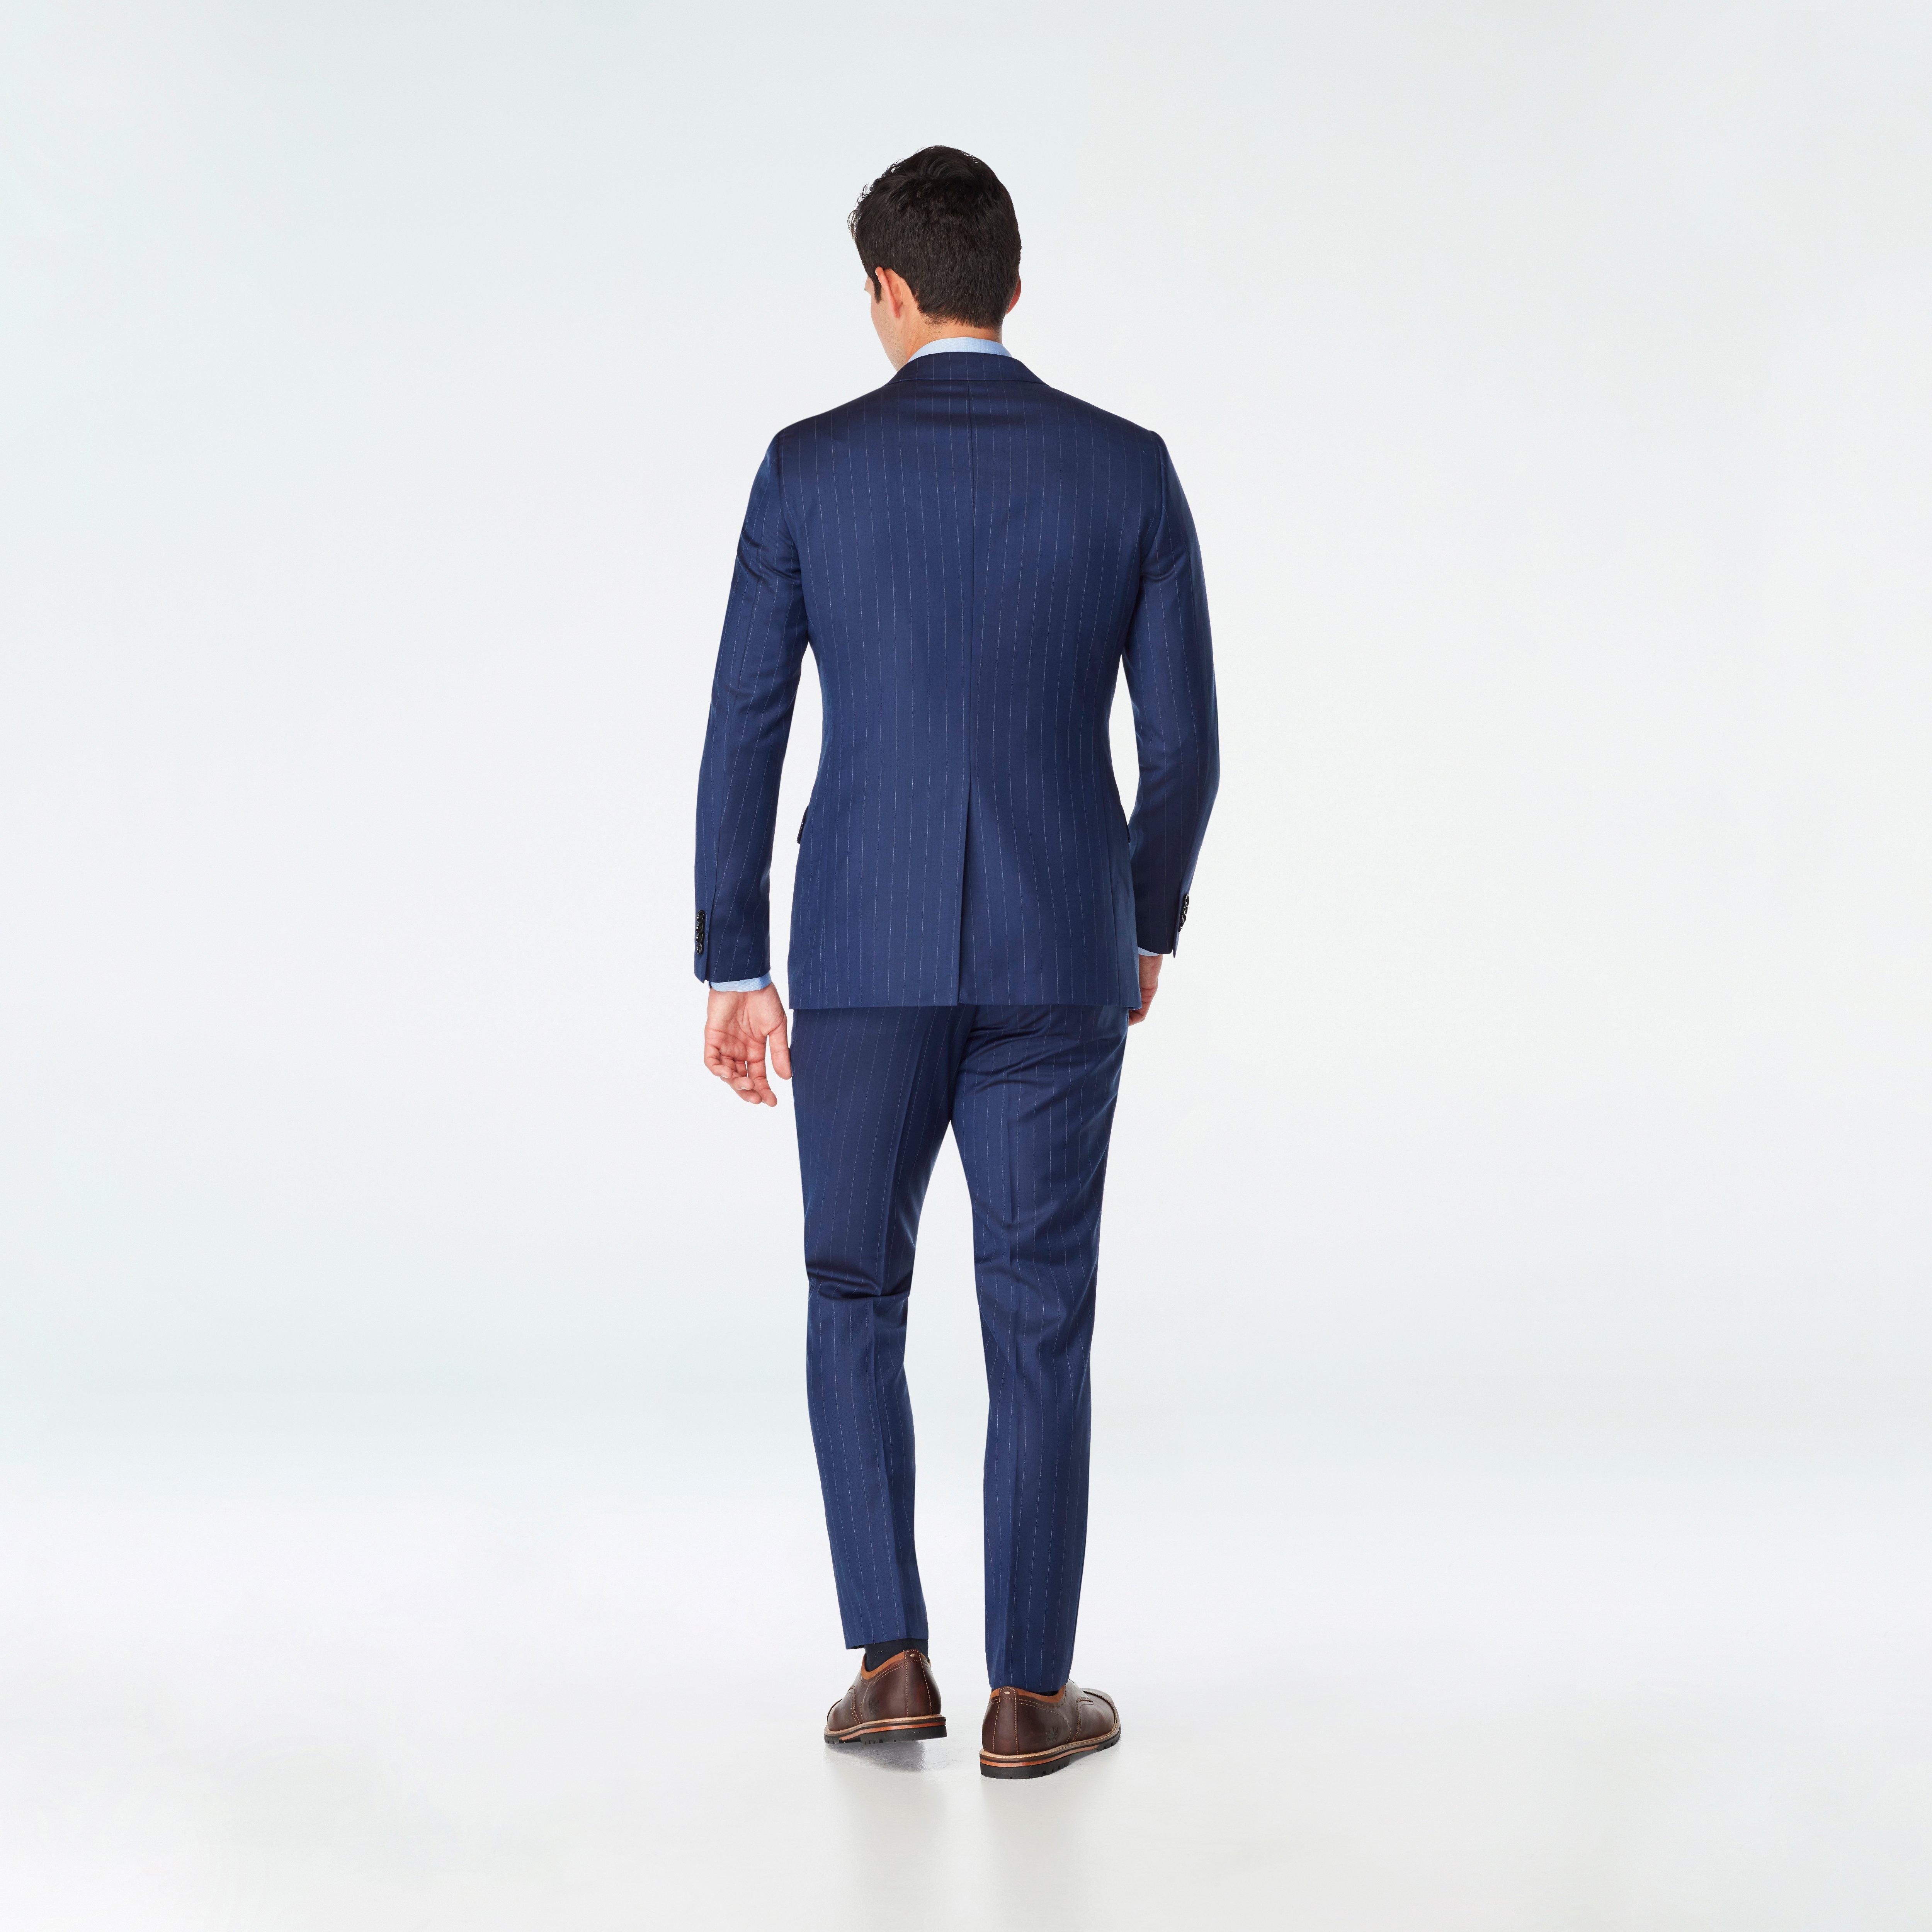 Custom Suits Made For You - Hemsworth Stripe Navy Suit | INDOCHINO